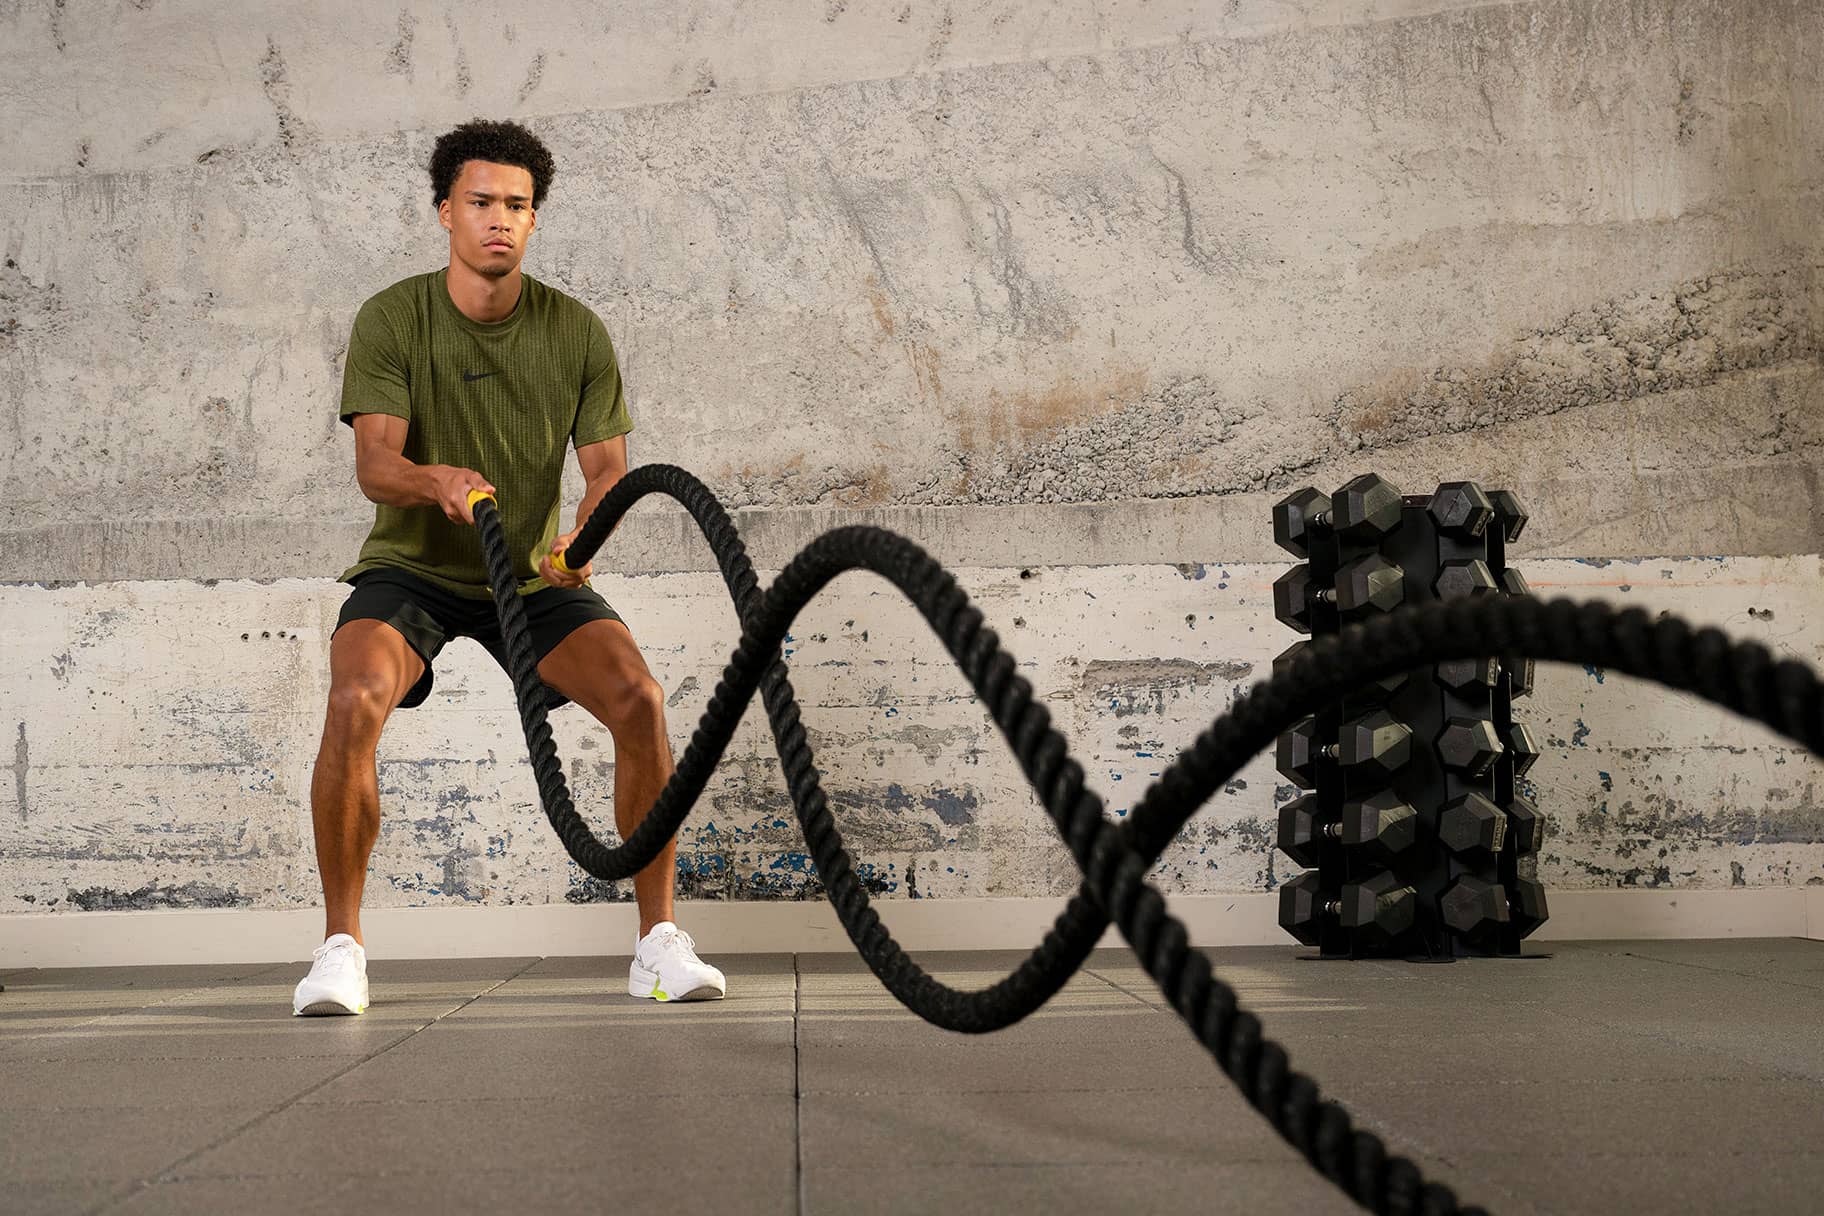 Battle Ropes: What They Are, Their Benefits, and Exercises You Can Do